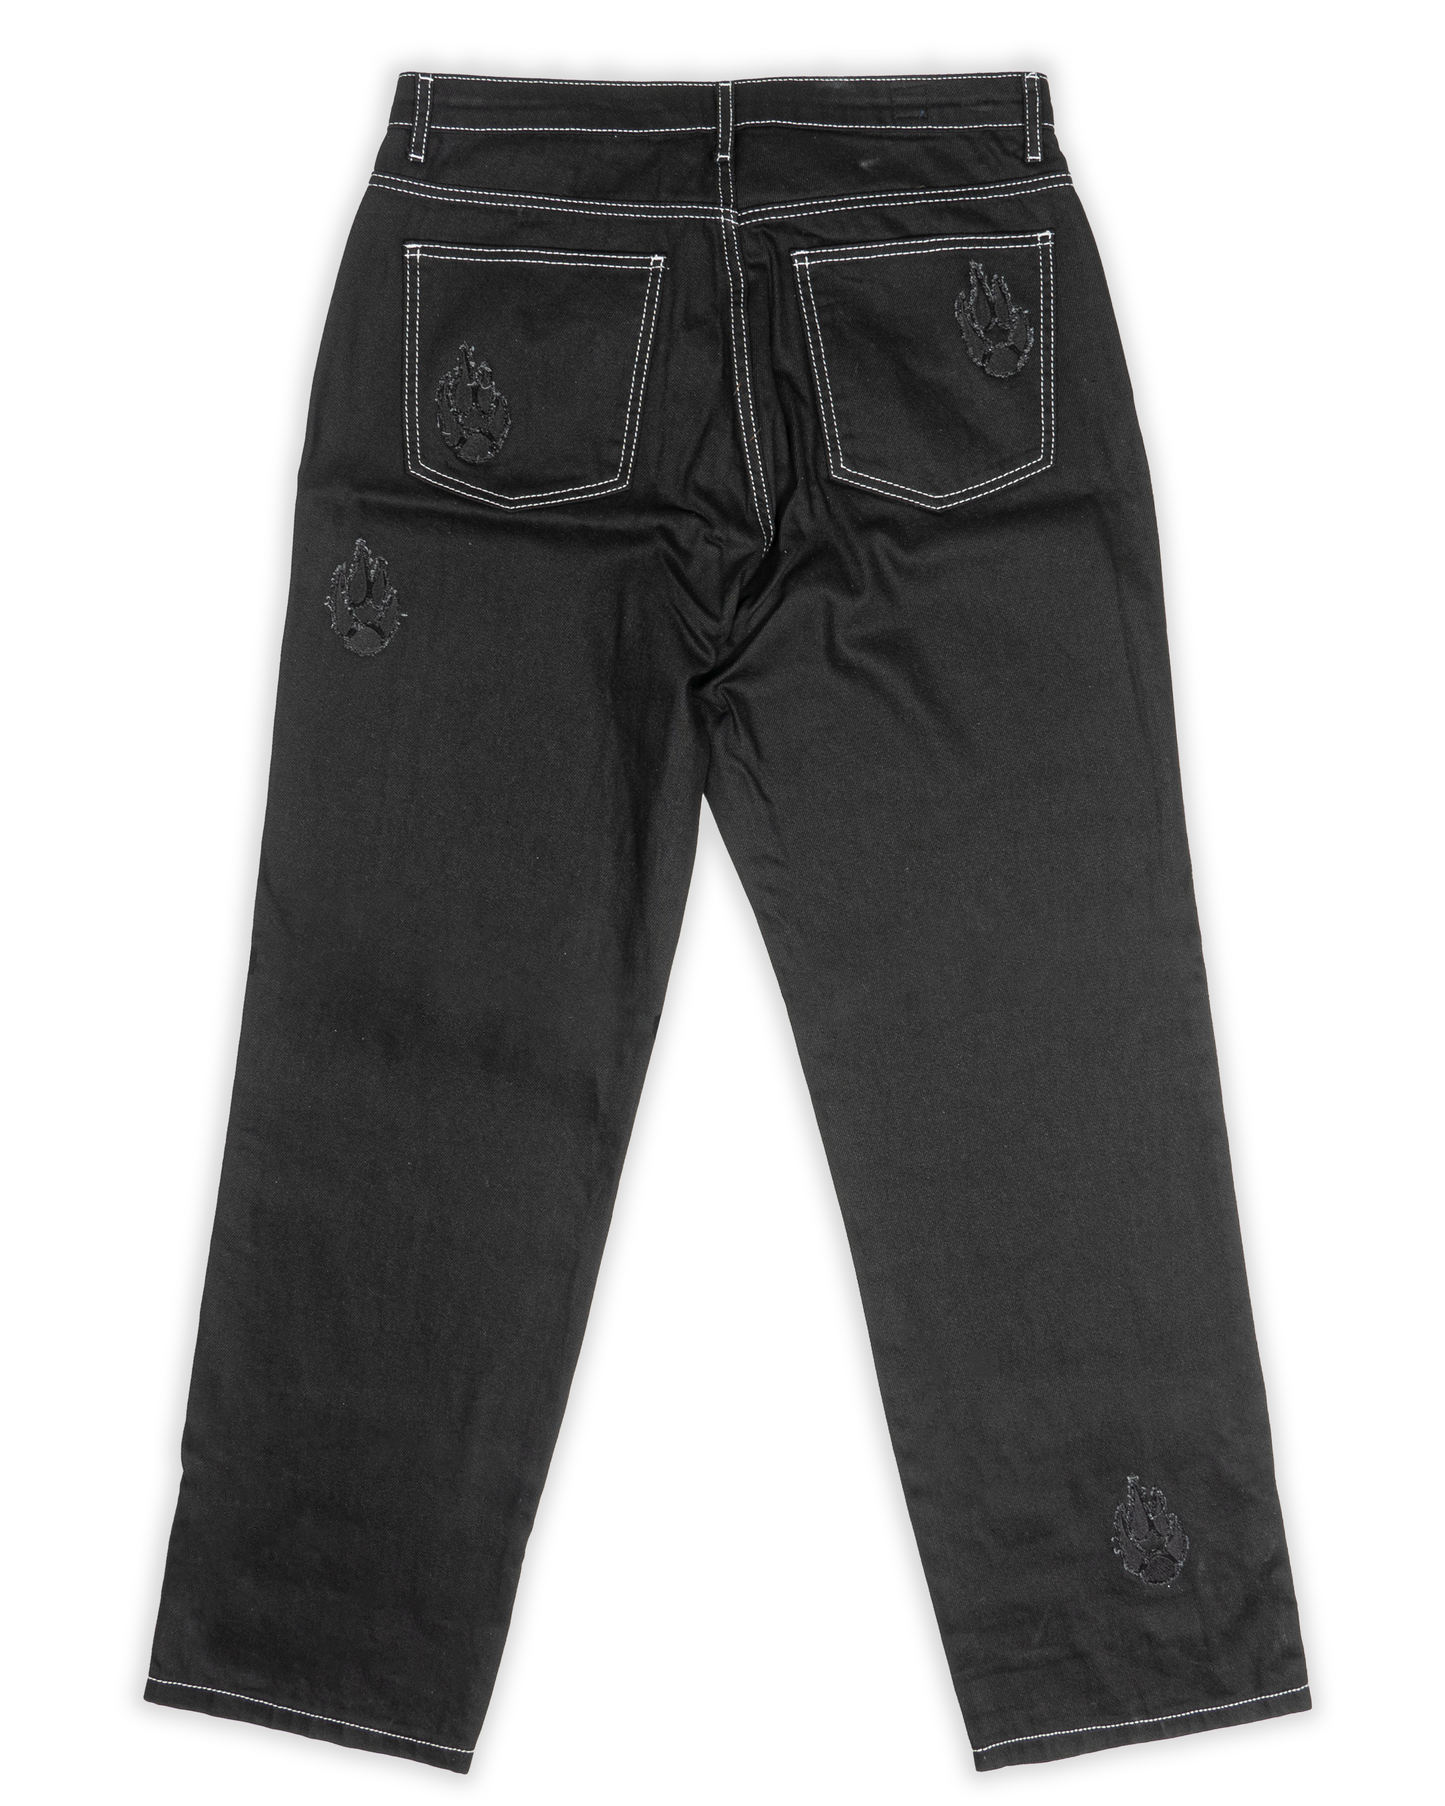 Paws Jeans Waxed Black